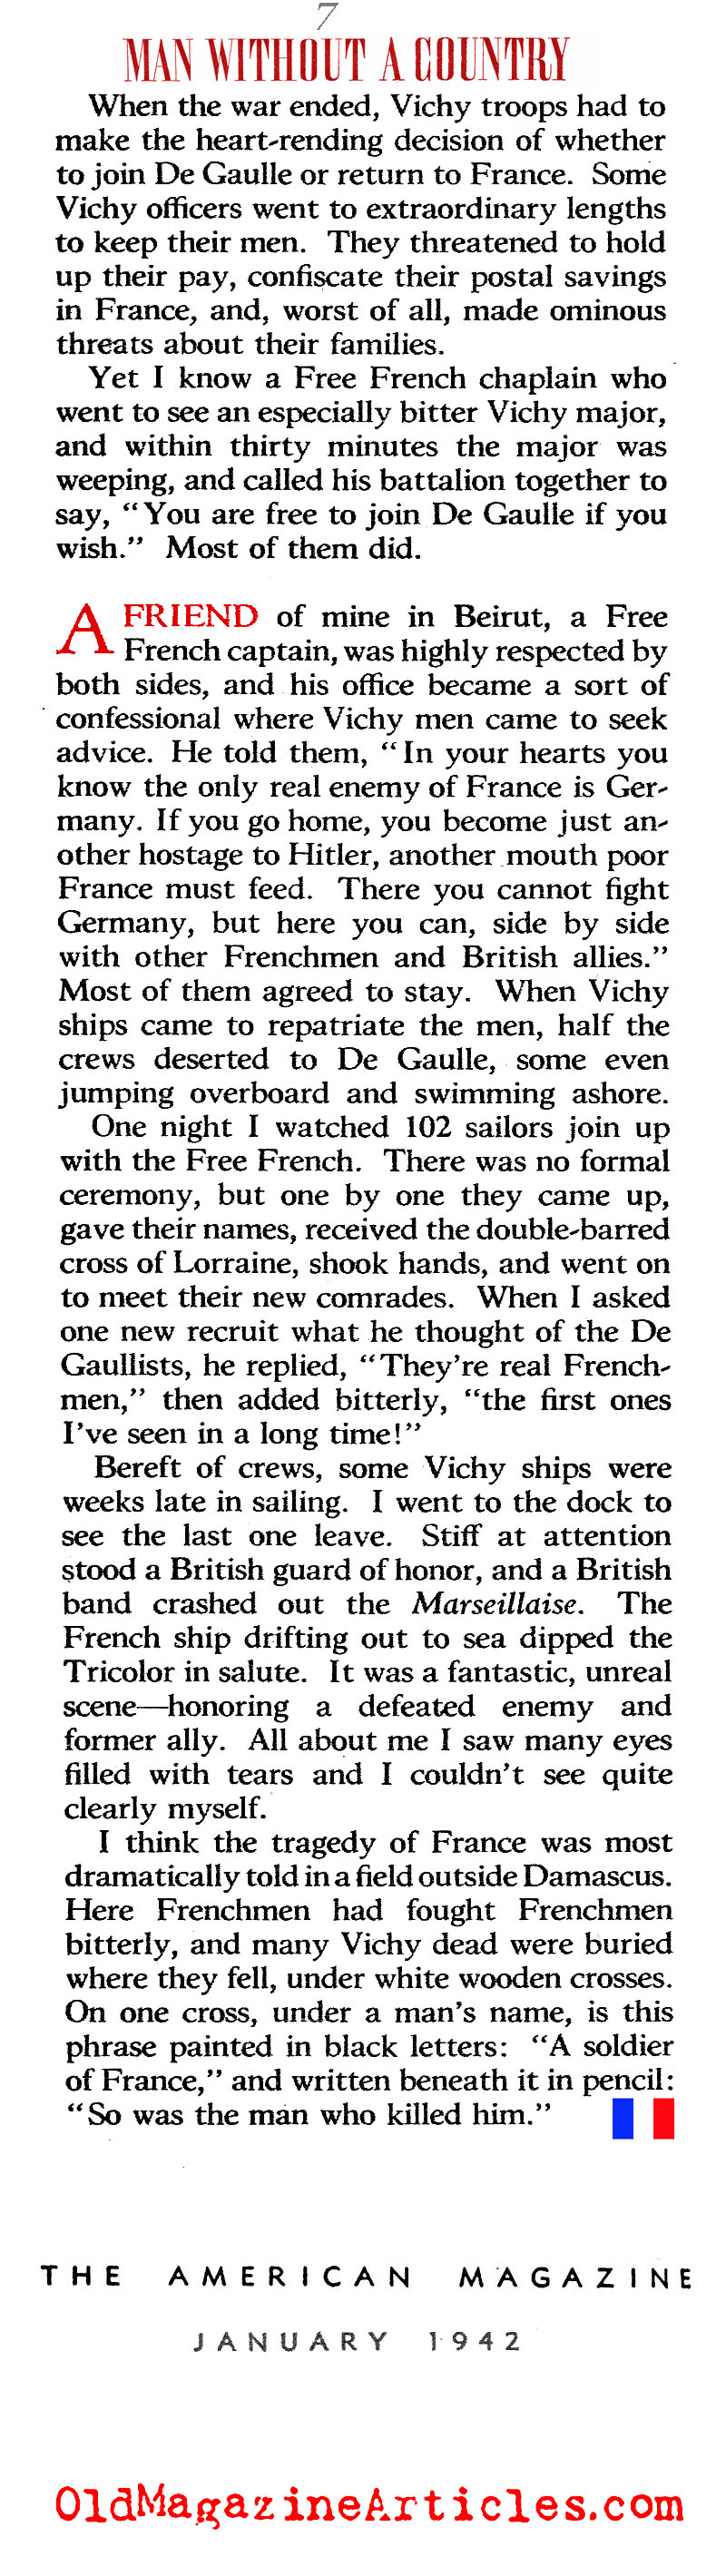 The Leader of Free France (The American Magazine, 1942)